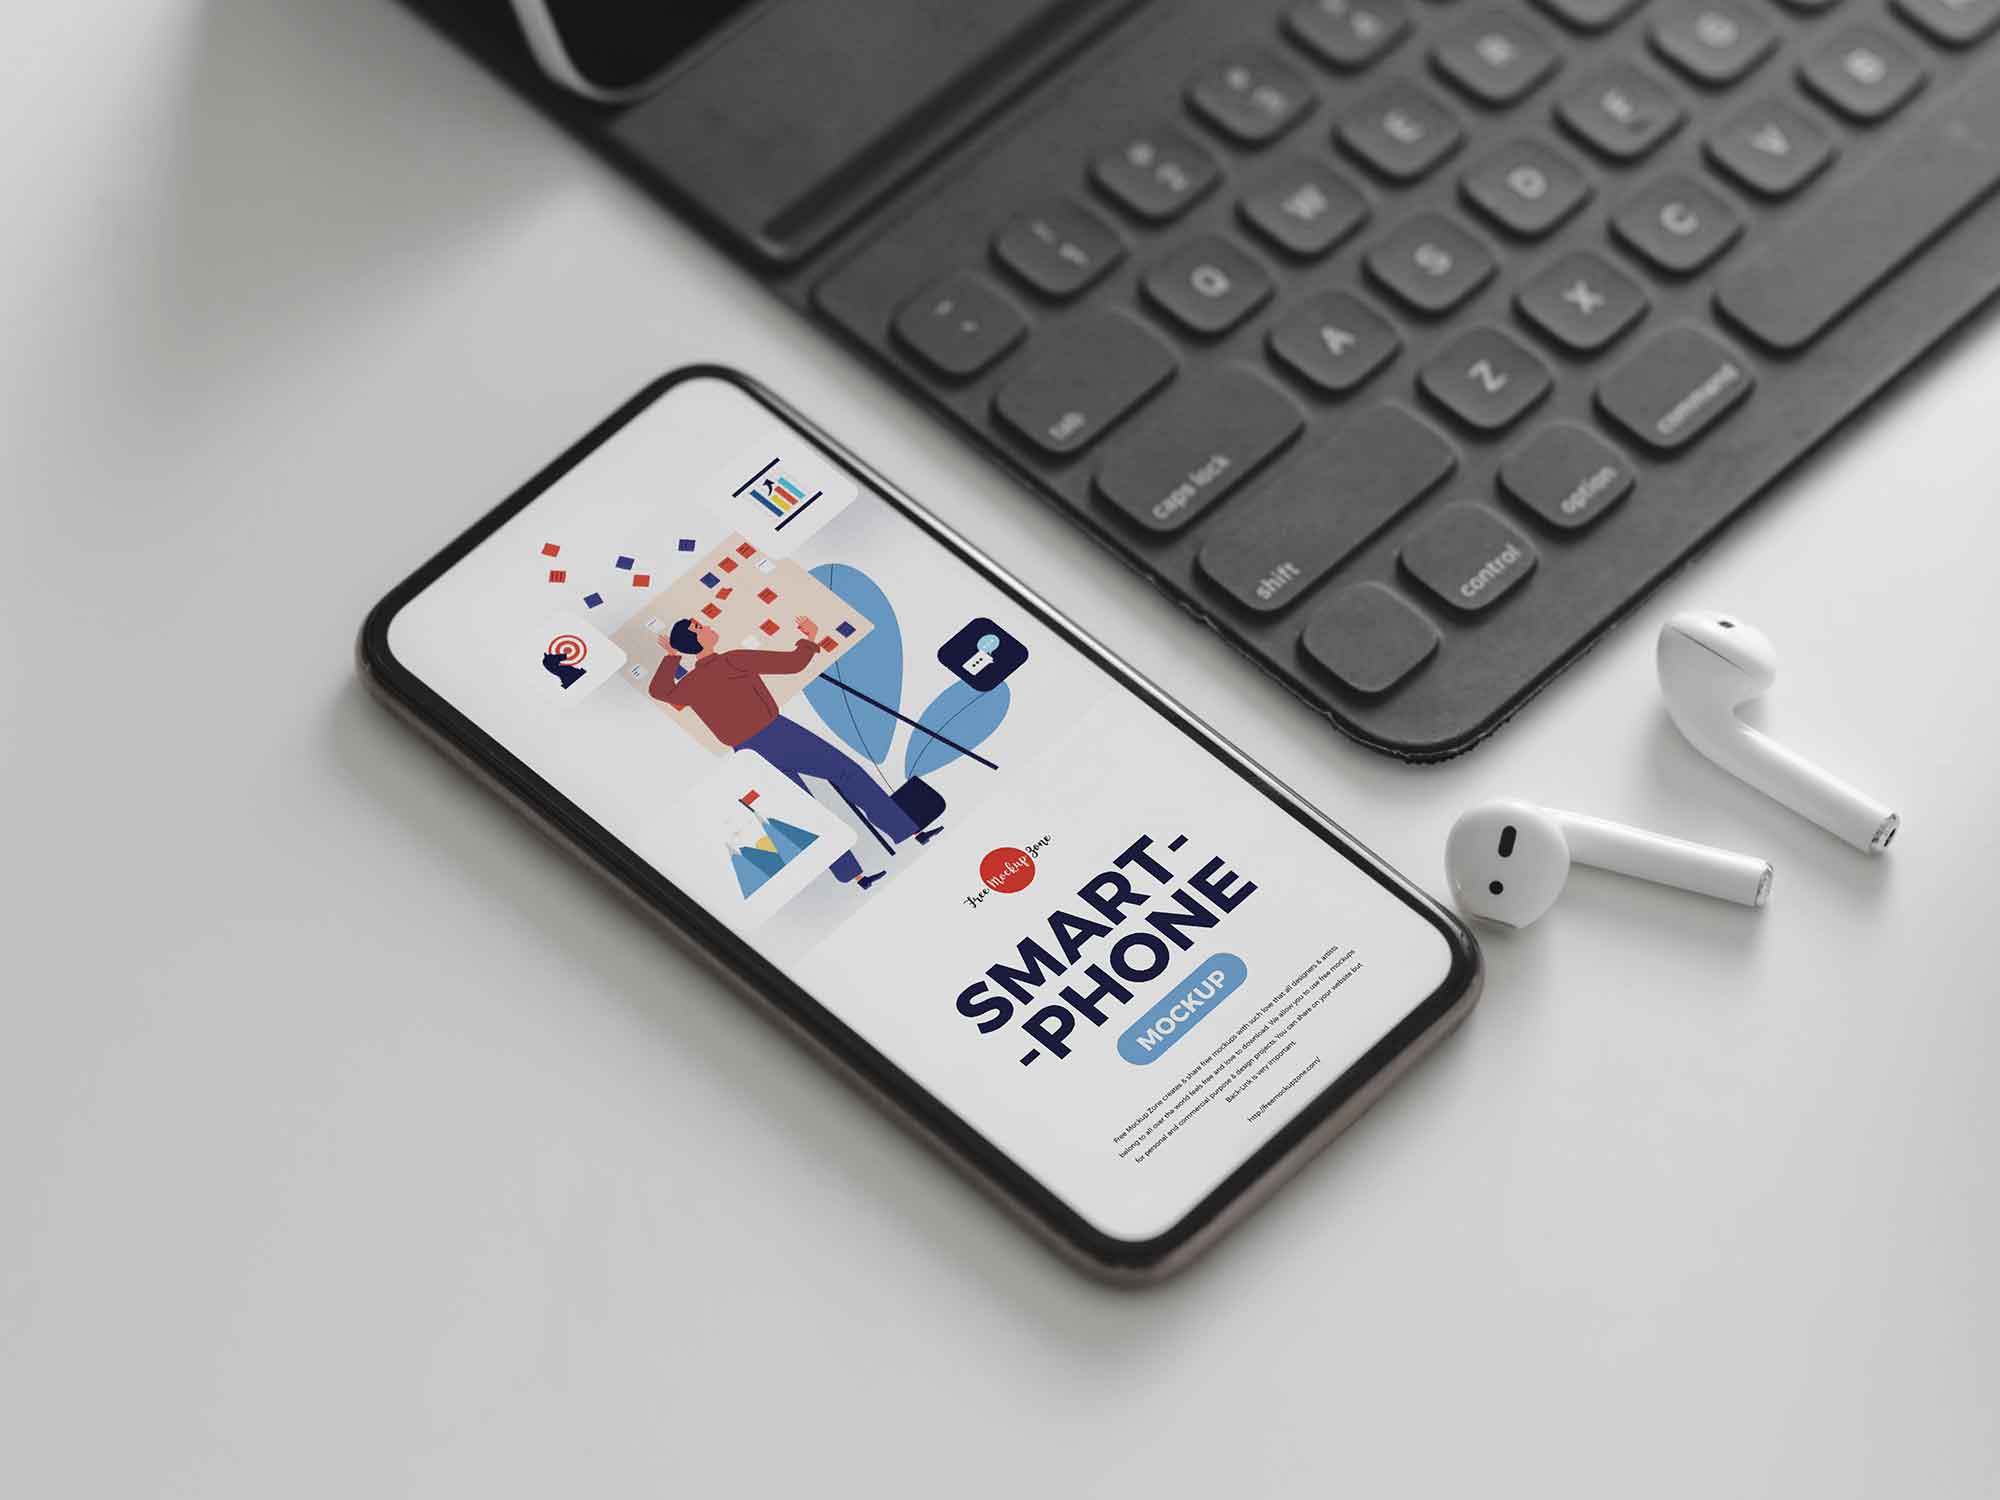 Download Phone And Keyboard And Airpods Psd Mockup Psd By Free Mockup Zone